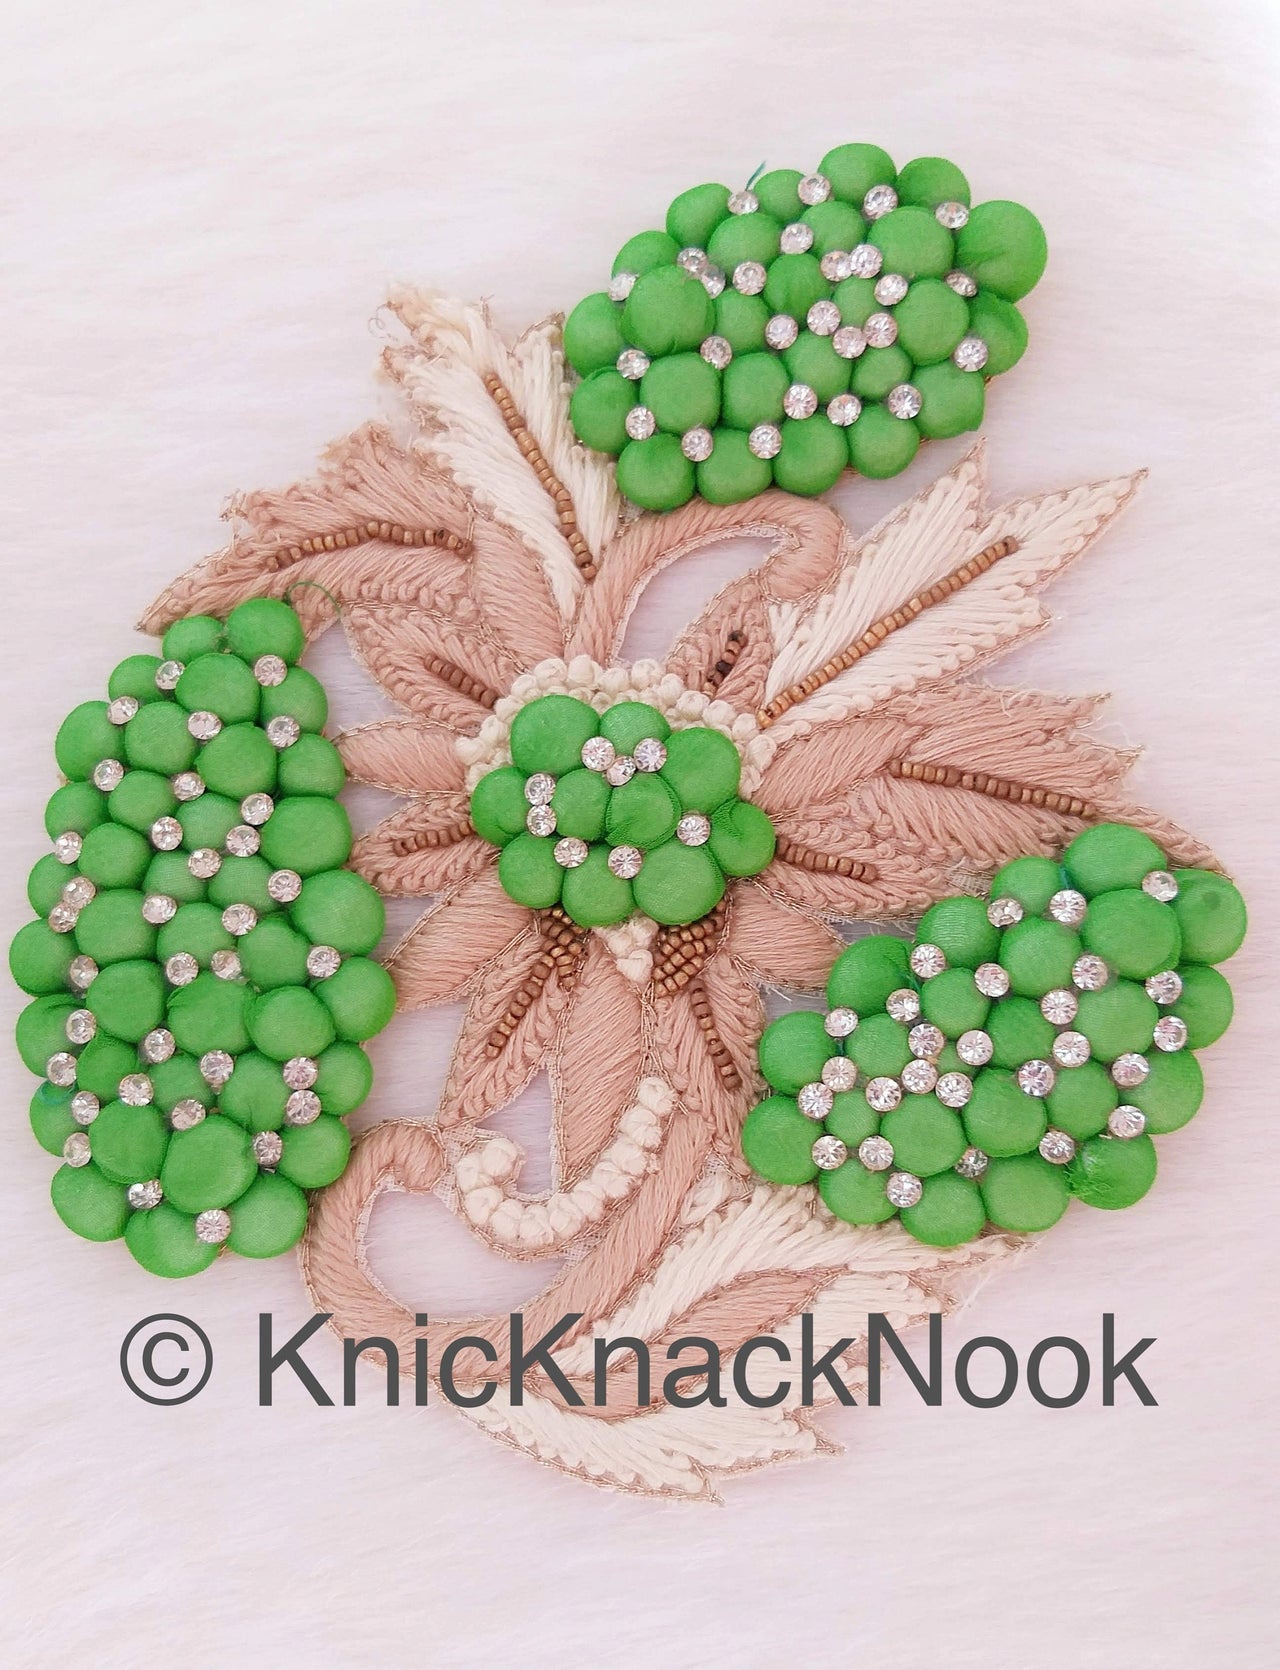 Green, Beige And Off White Embroidered Flower Applique Patch With Diamante Crytals And Gold Matt Beads, 3D Floral Applique